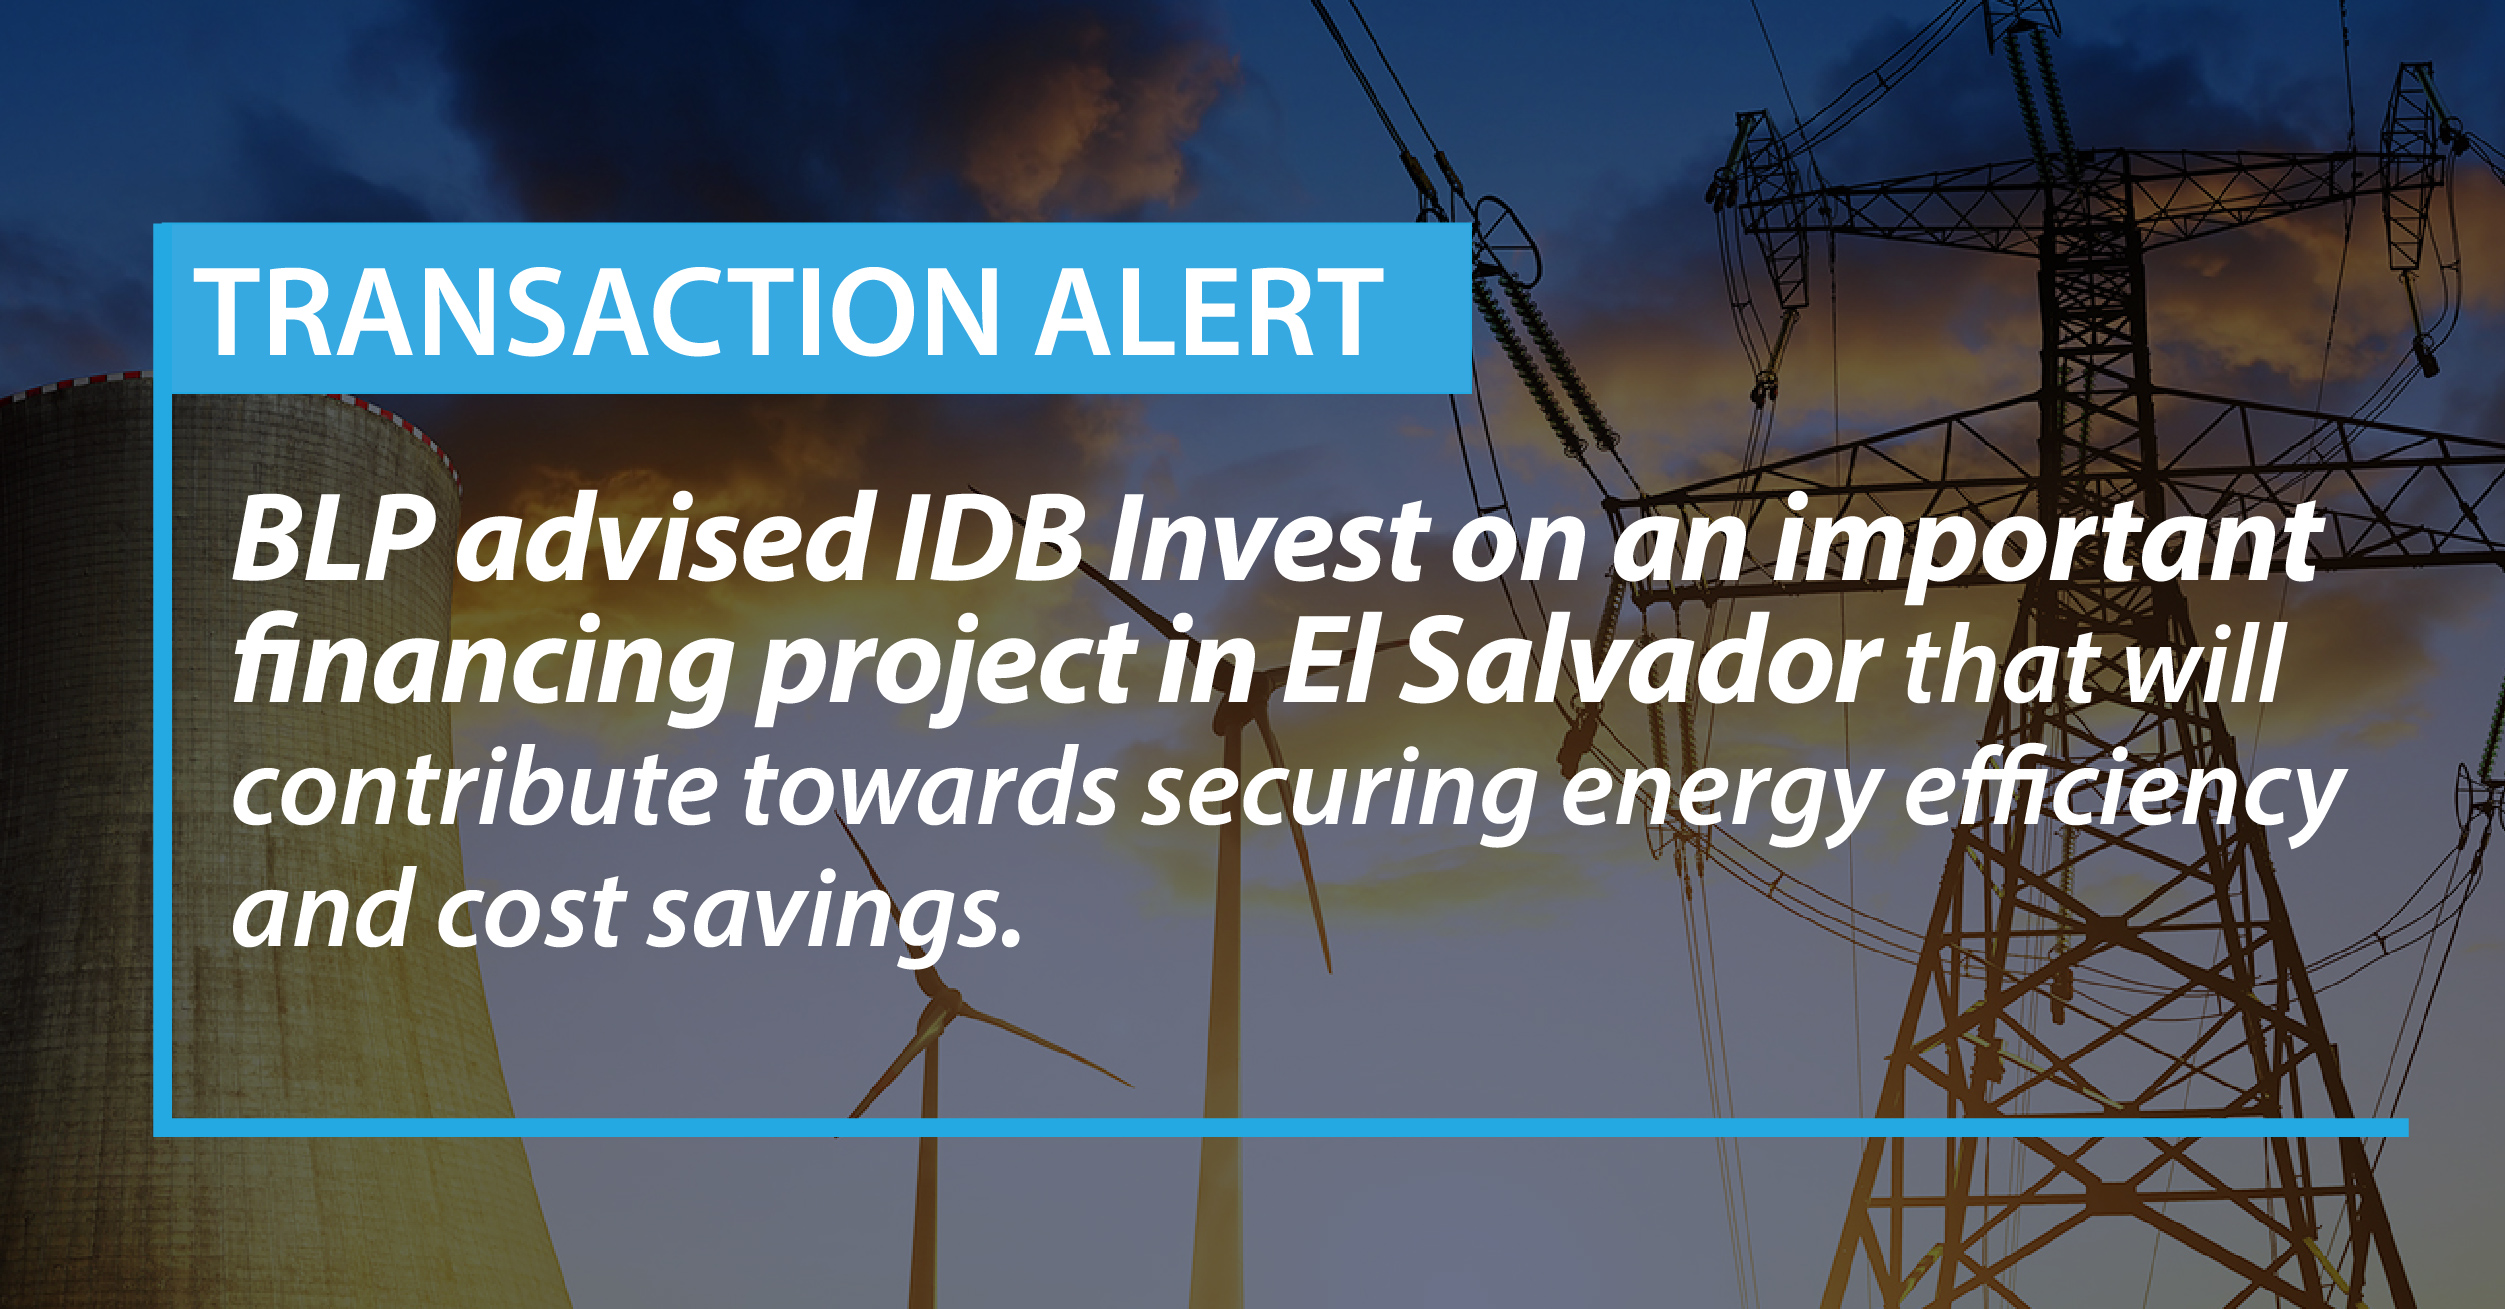 BLP advised IDB Invest on an important financing project in El Salvador that will contribute towards securing energy efficiency and cost savings.